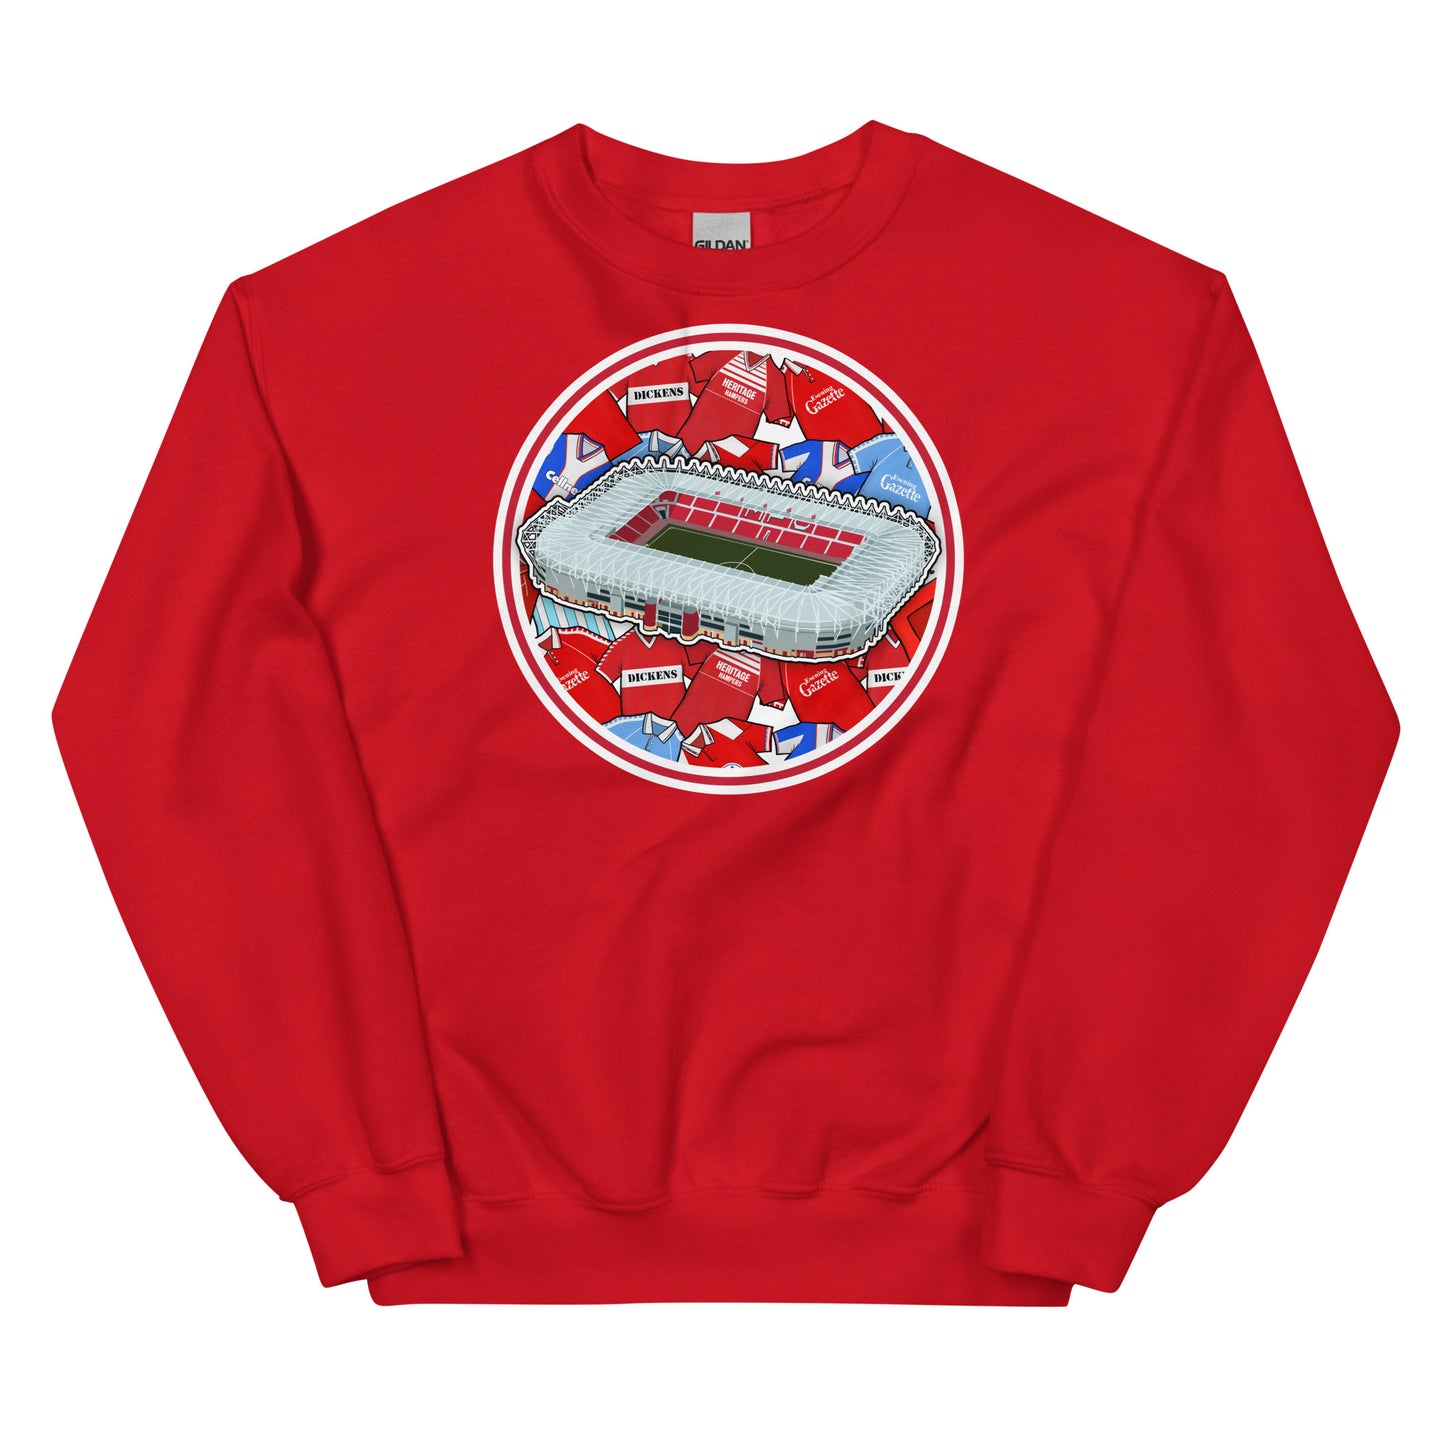 Red Retro Sweatshirt Inspired by the home of Middlesbrough Football, The Riverside Stadium in North Yorkshire!